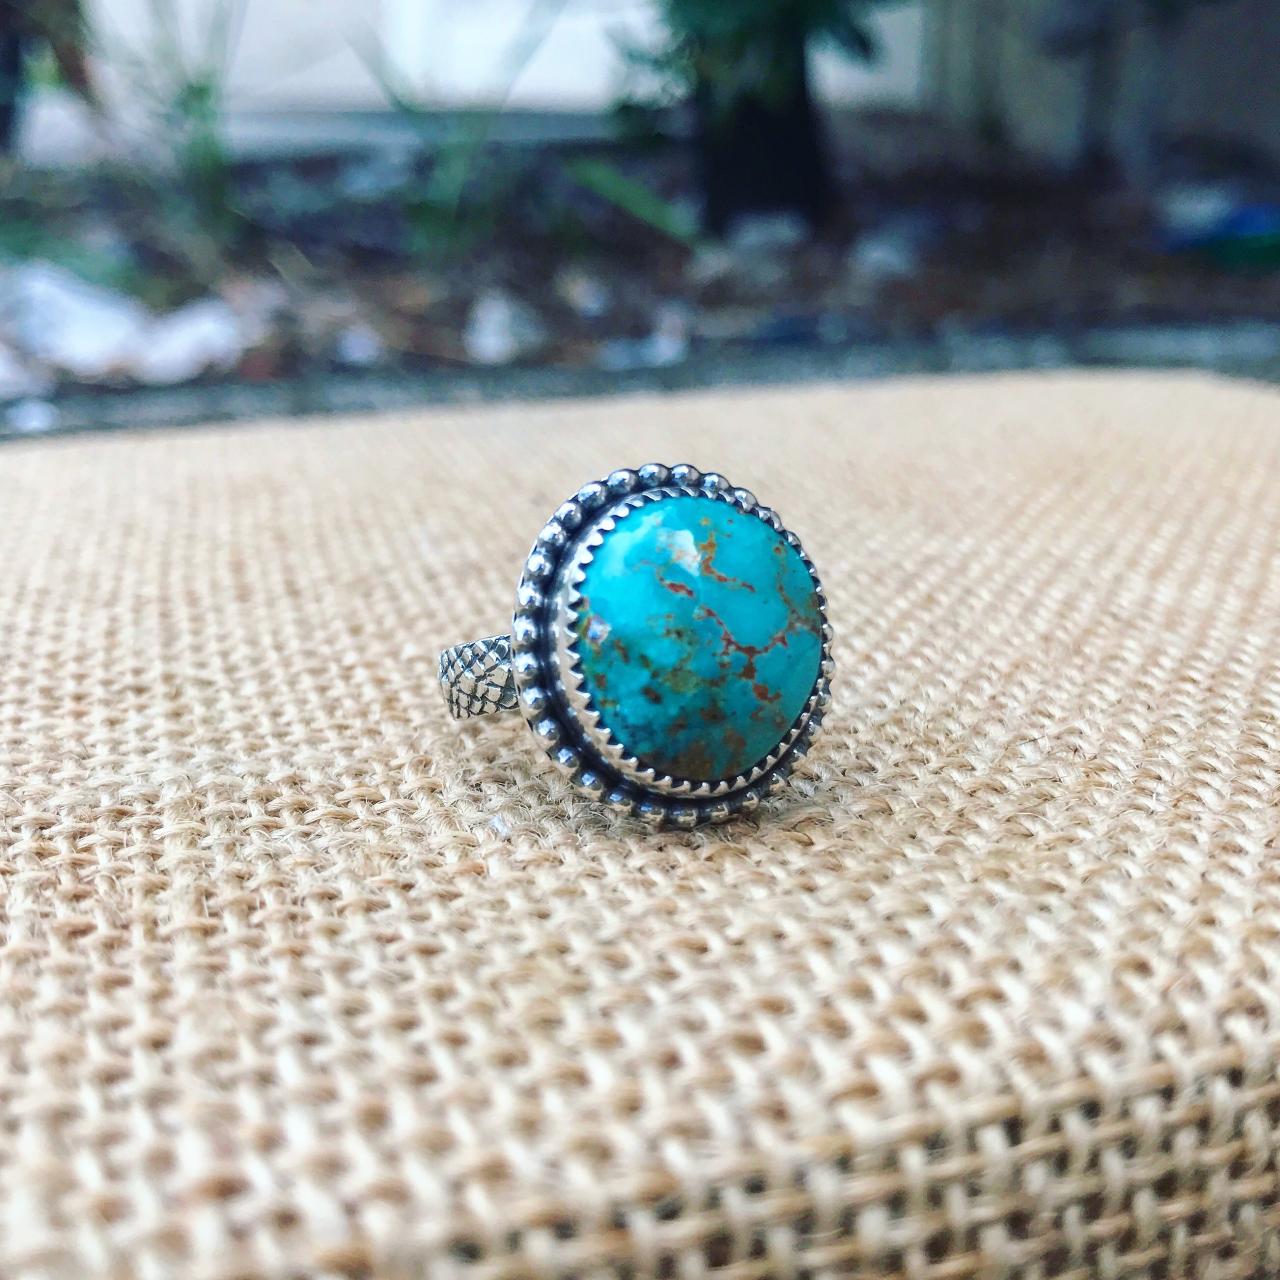 Sierra Nevada Turquoise Ring - Statement Ring - Sterling Silver - Us Size 7